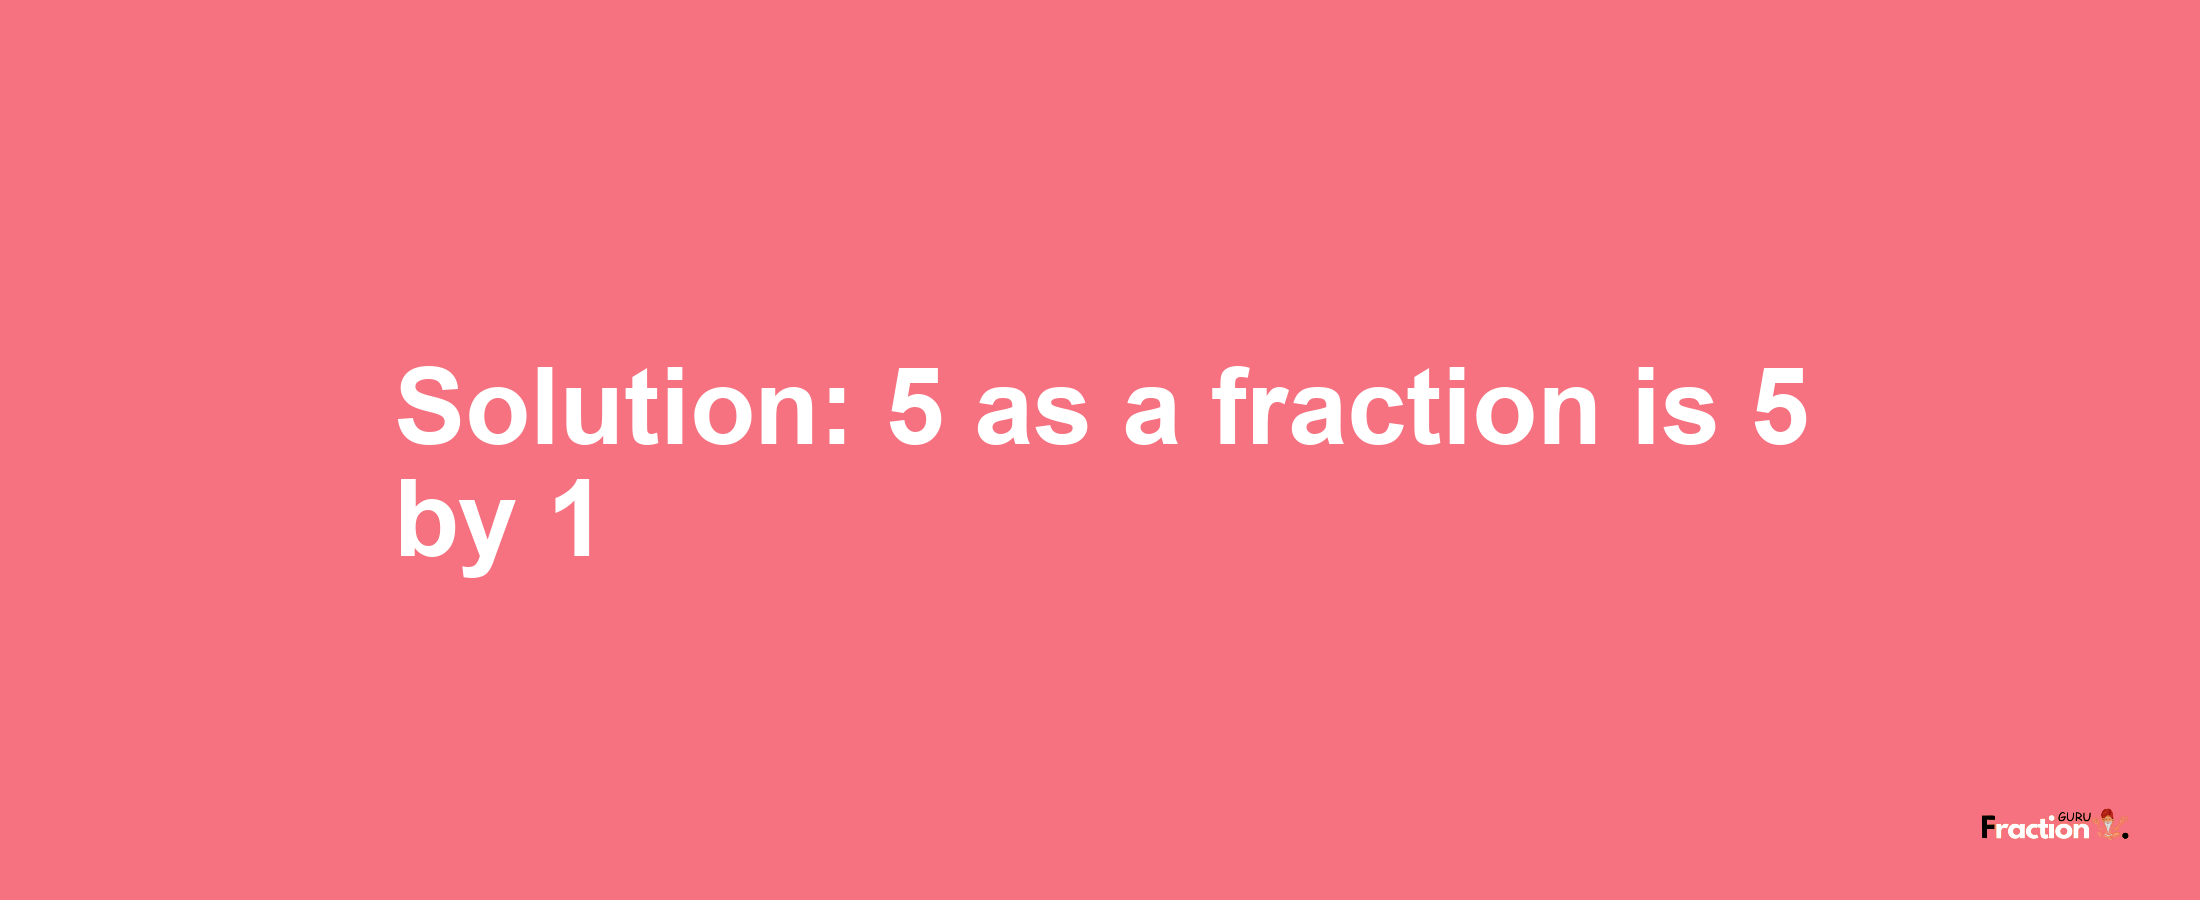 Solution:5 as a fraction is 5/1